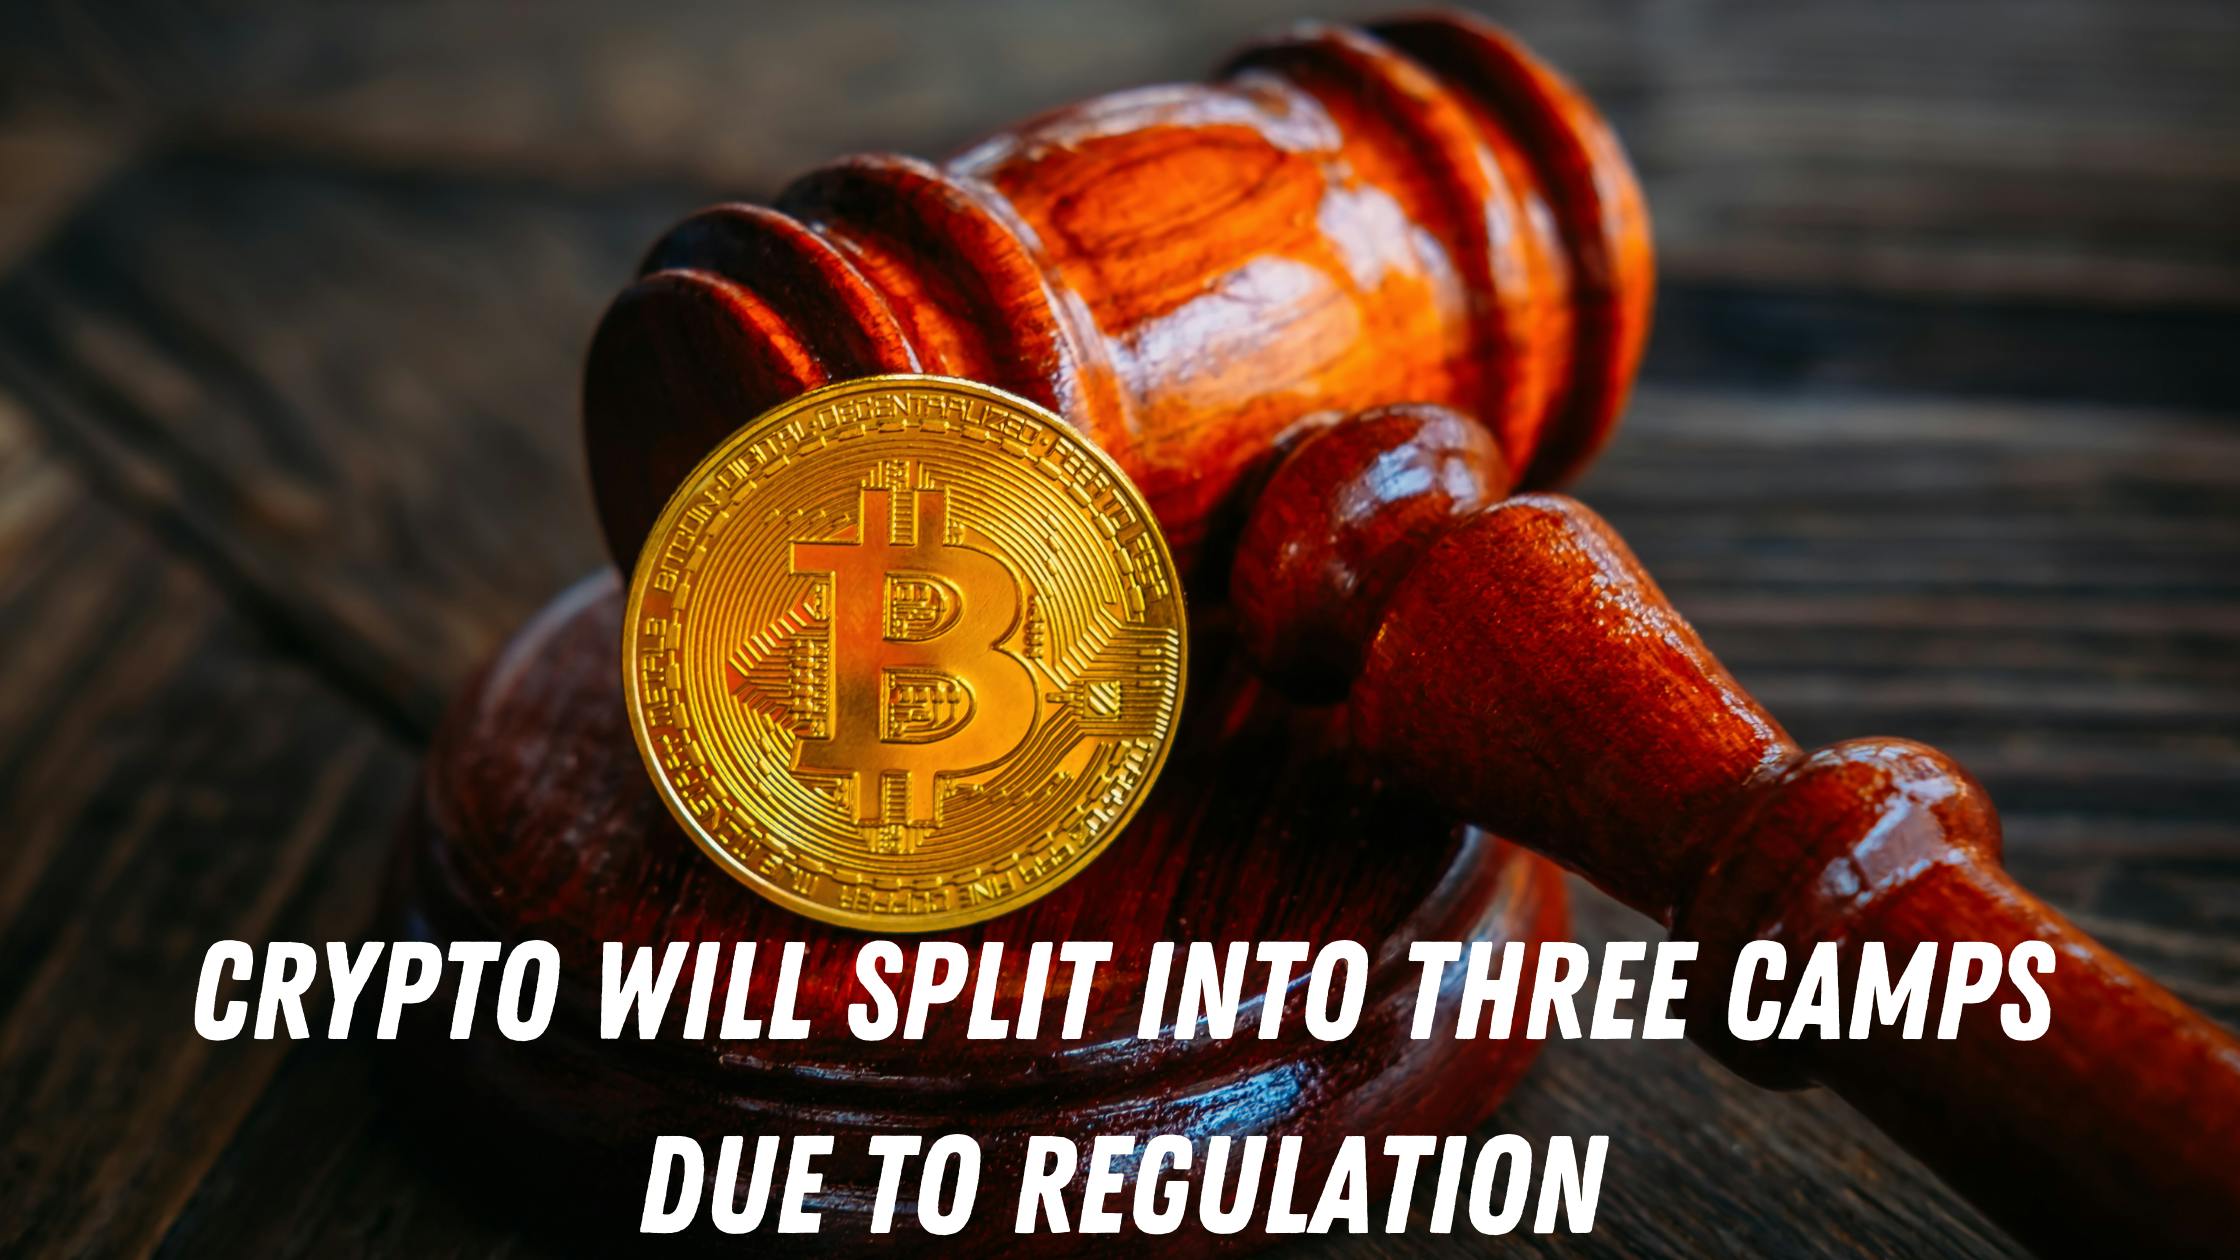 Caitlin Long: Crypto Will Split Into Three Camps Due to Regulation